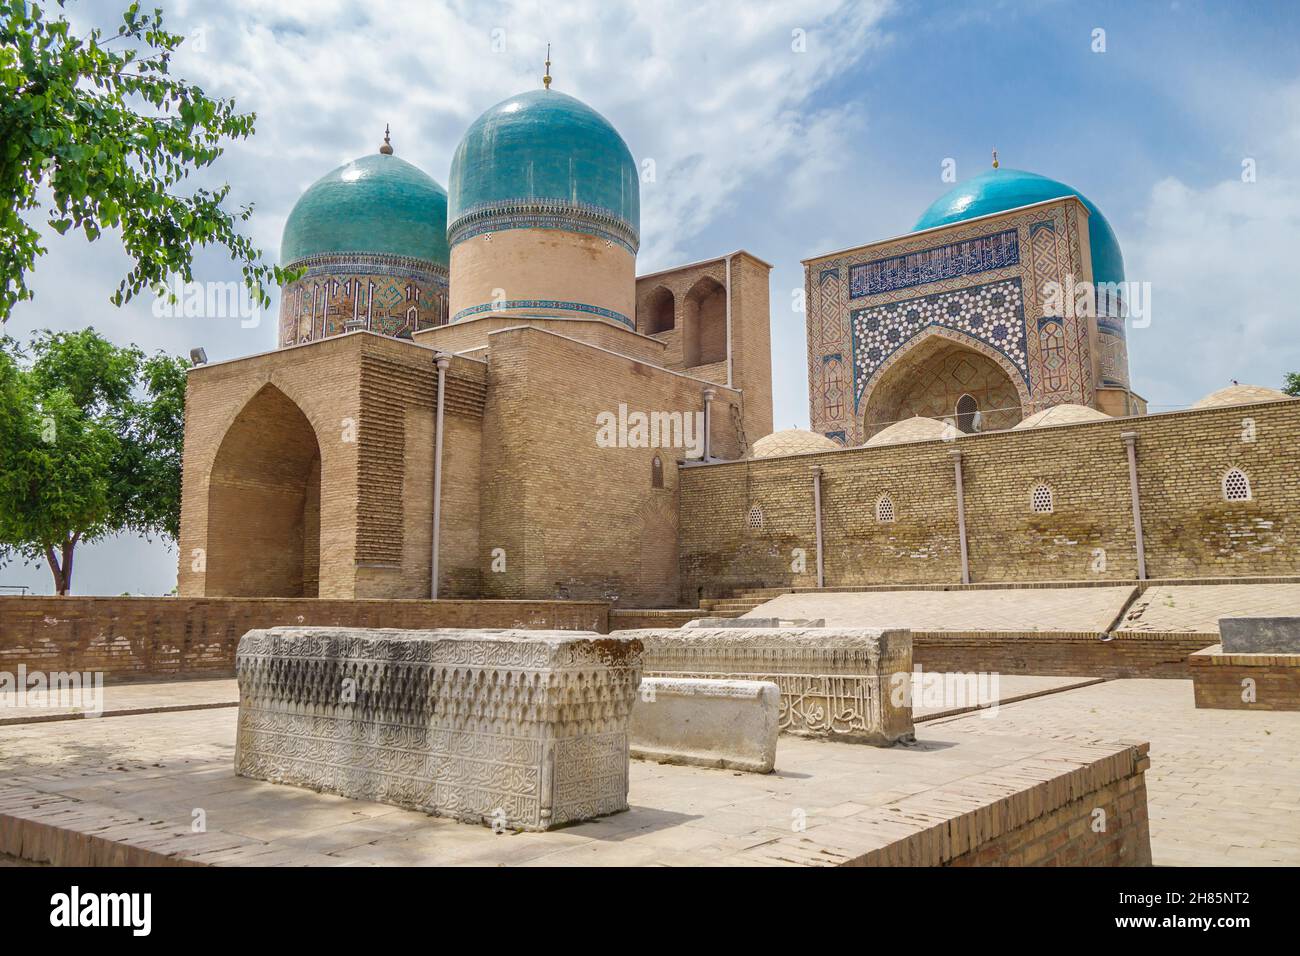 Sheikh Kulal Mausoleum and Kok Gumbaz Mosque in Shakhrisabz, Uzbekistan. In foreground are medieval tombstones, also part of Dorut Tilavat complex. Fa Stock Photo